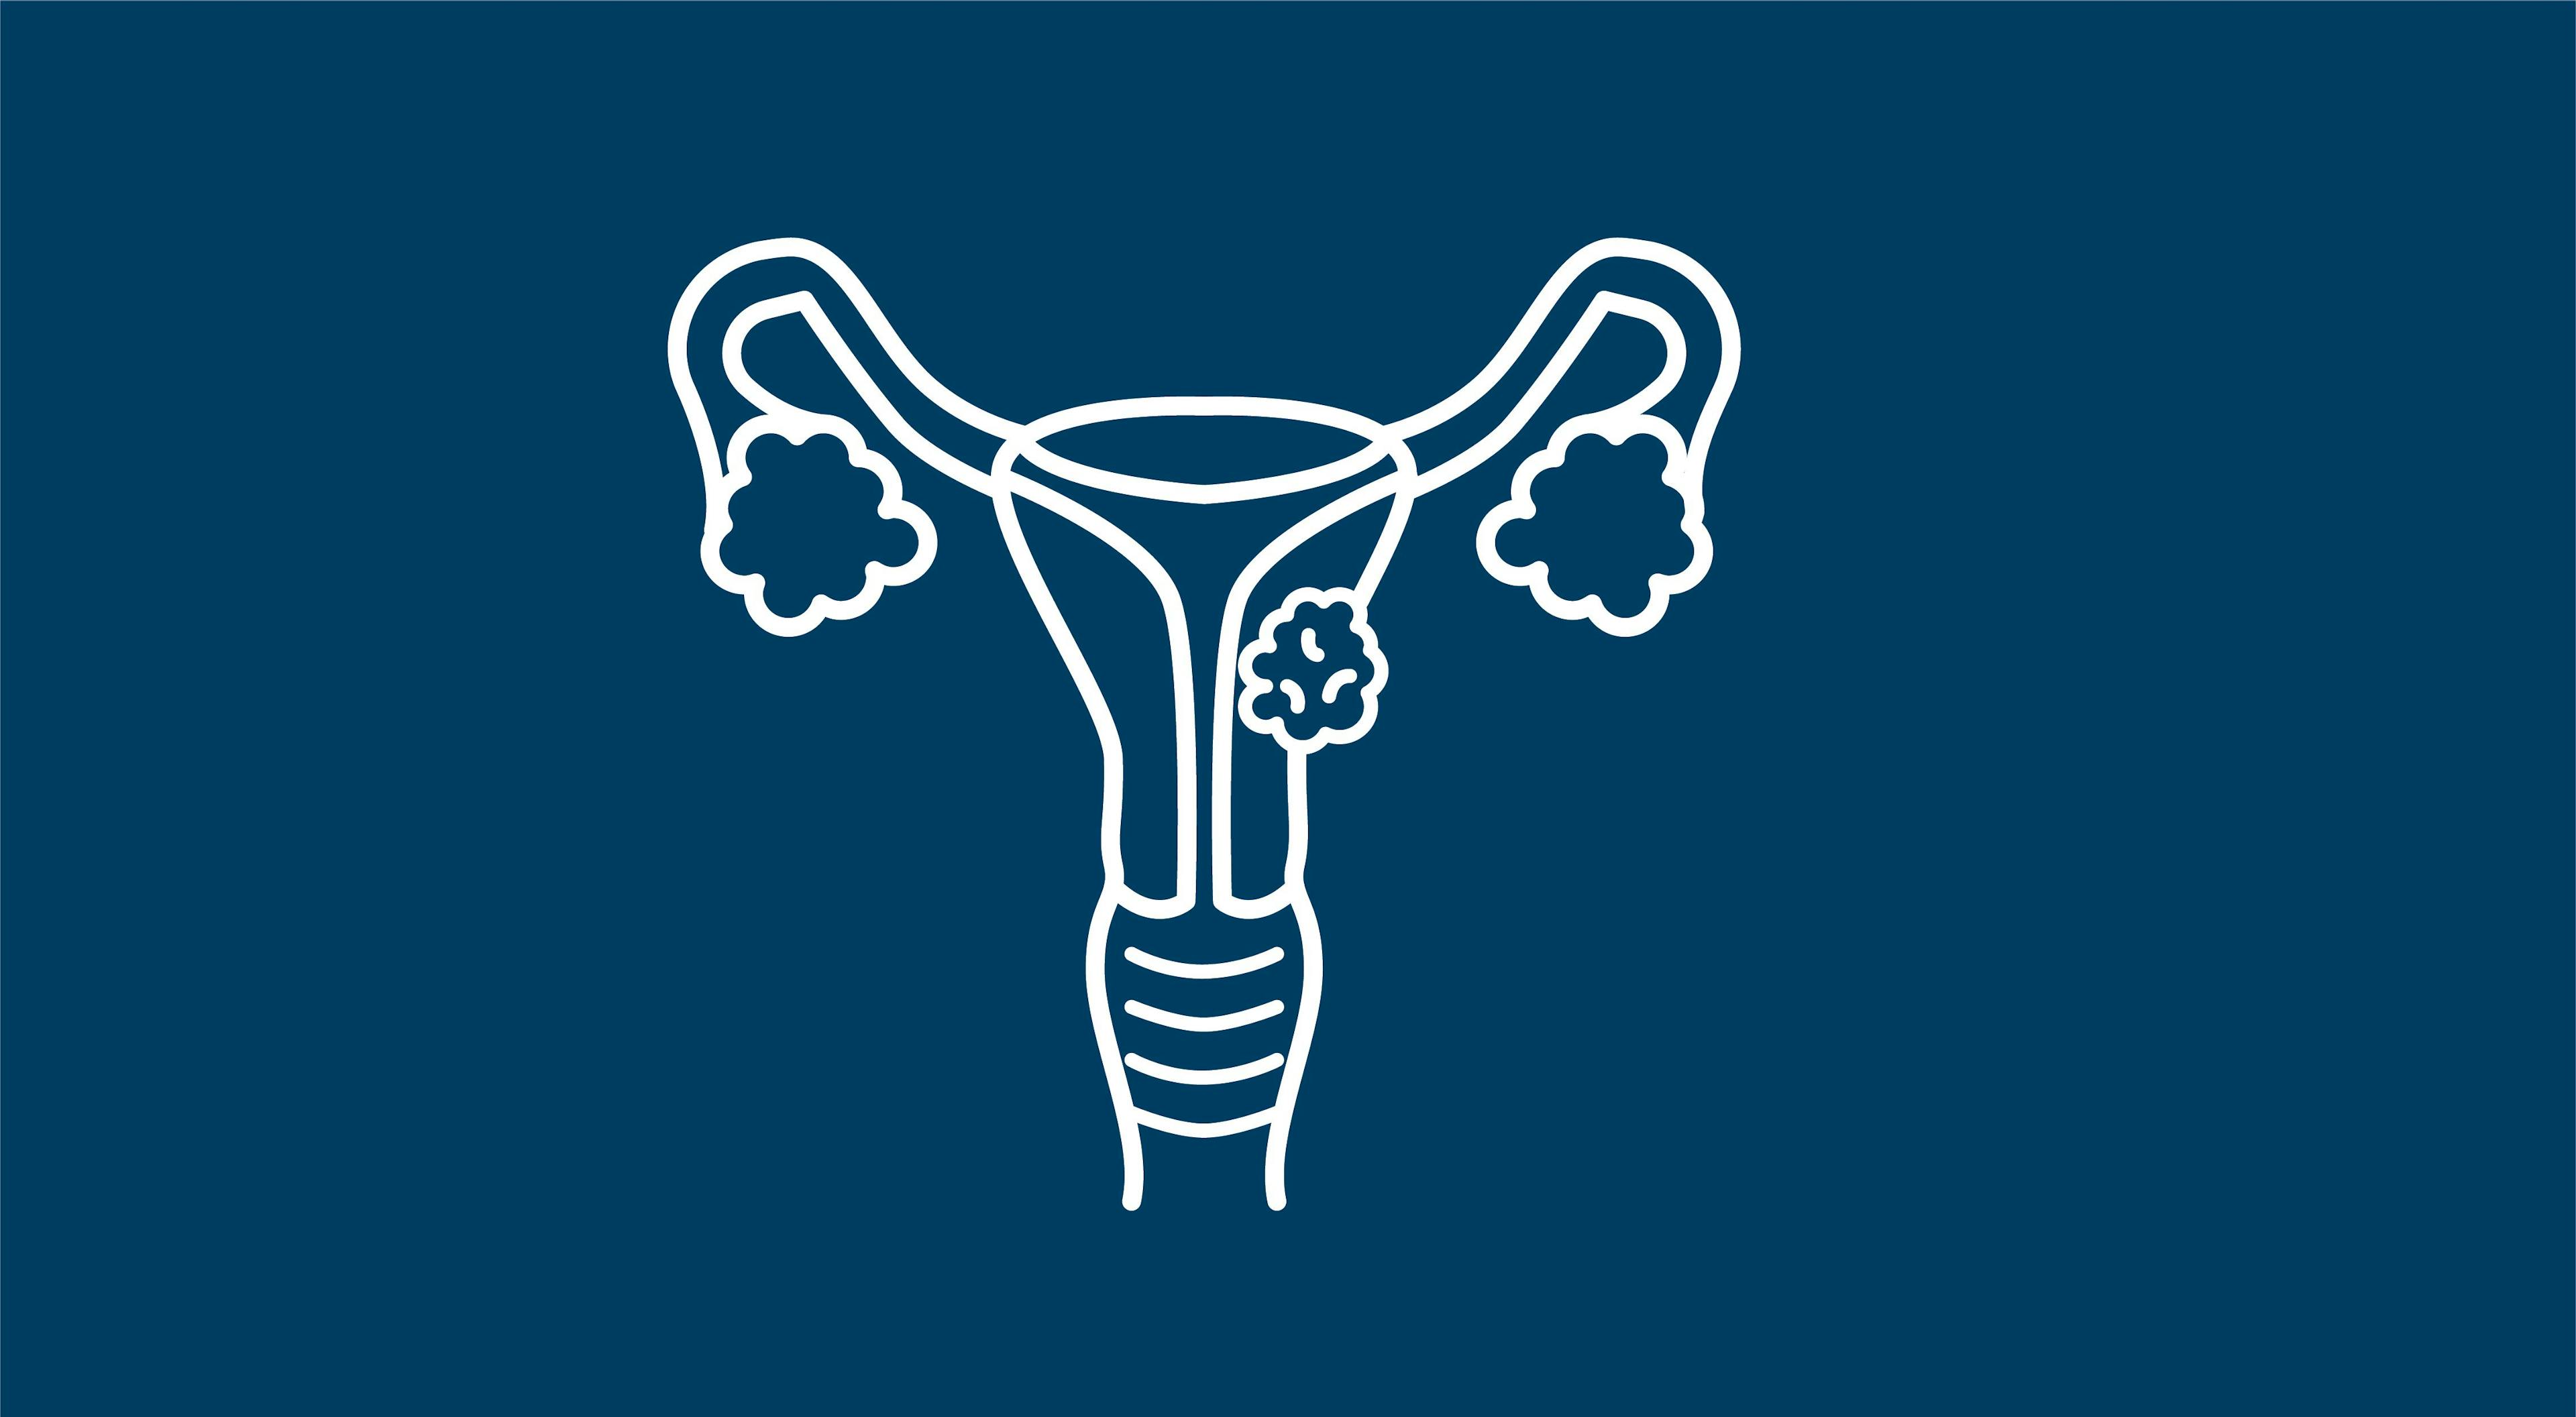 Cervical Cancer Advances May Heighten Preexisting Health Disparities